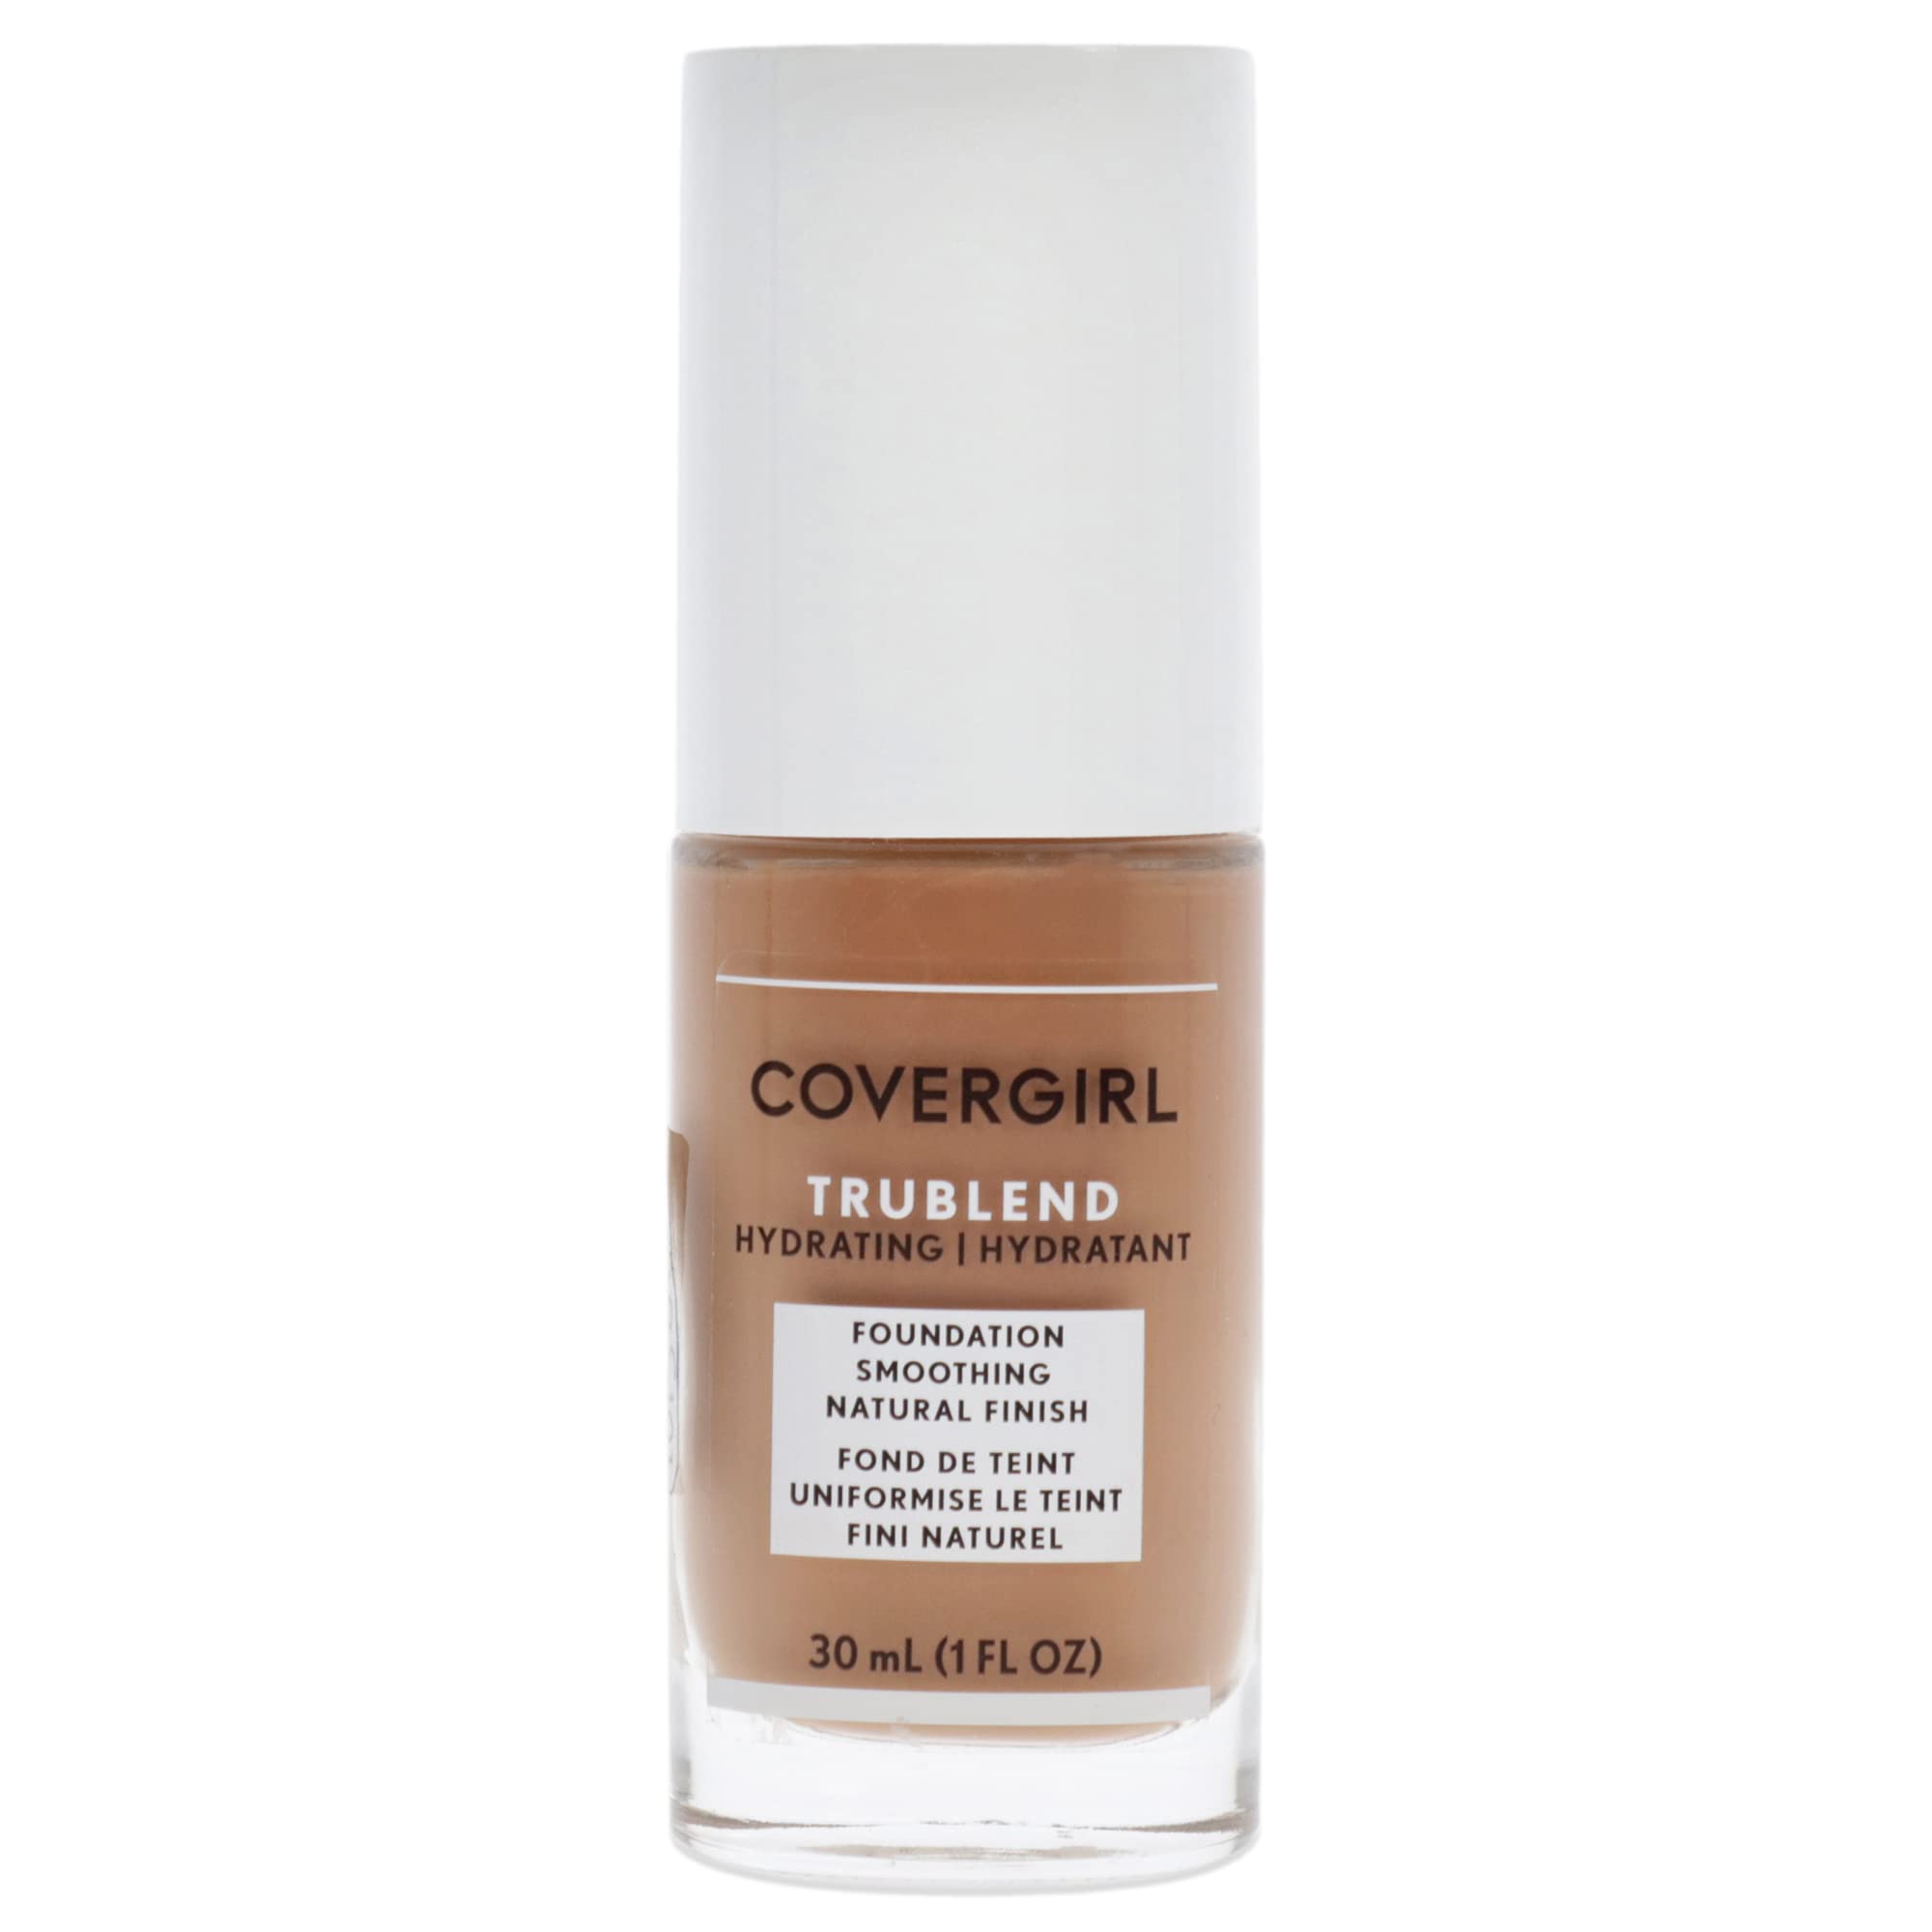 COVERGIRL truBlend Liquid Foundation Makeup Honey Beige D3, 1 oz (packaging may vary)